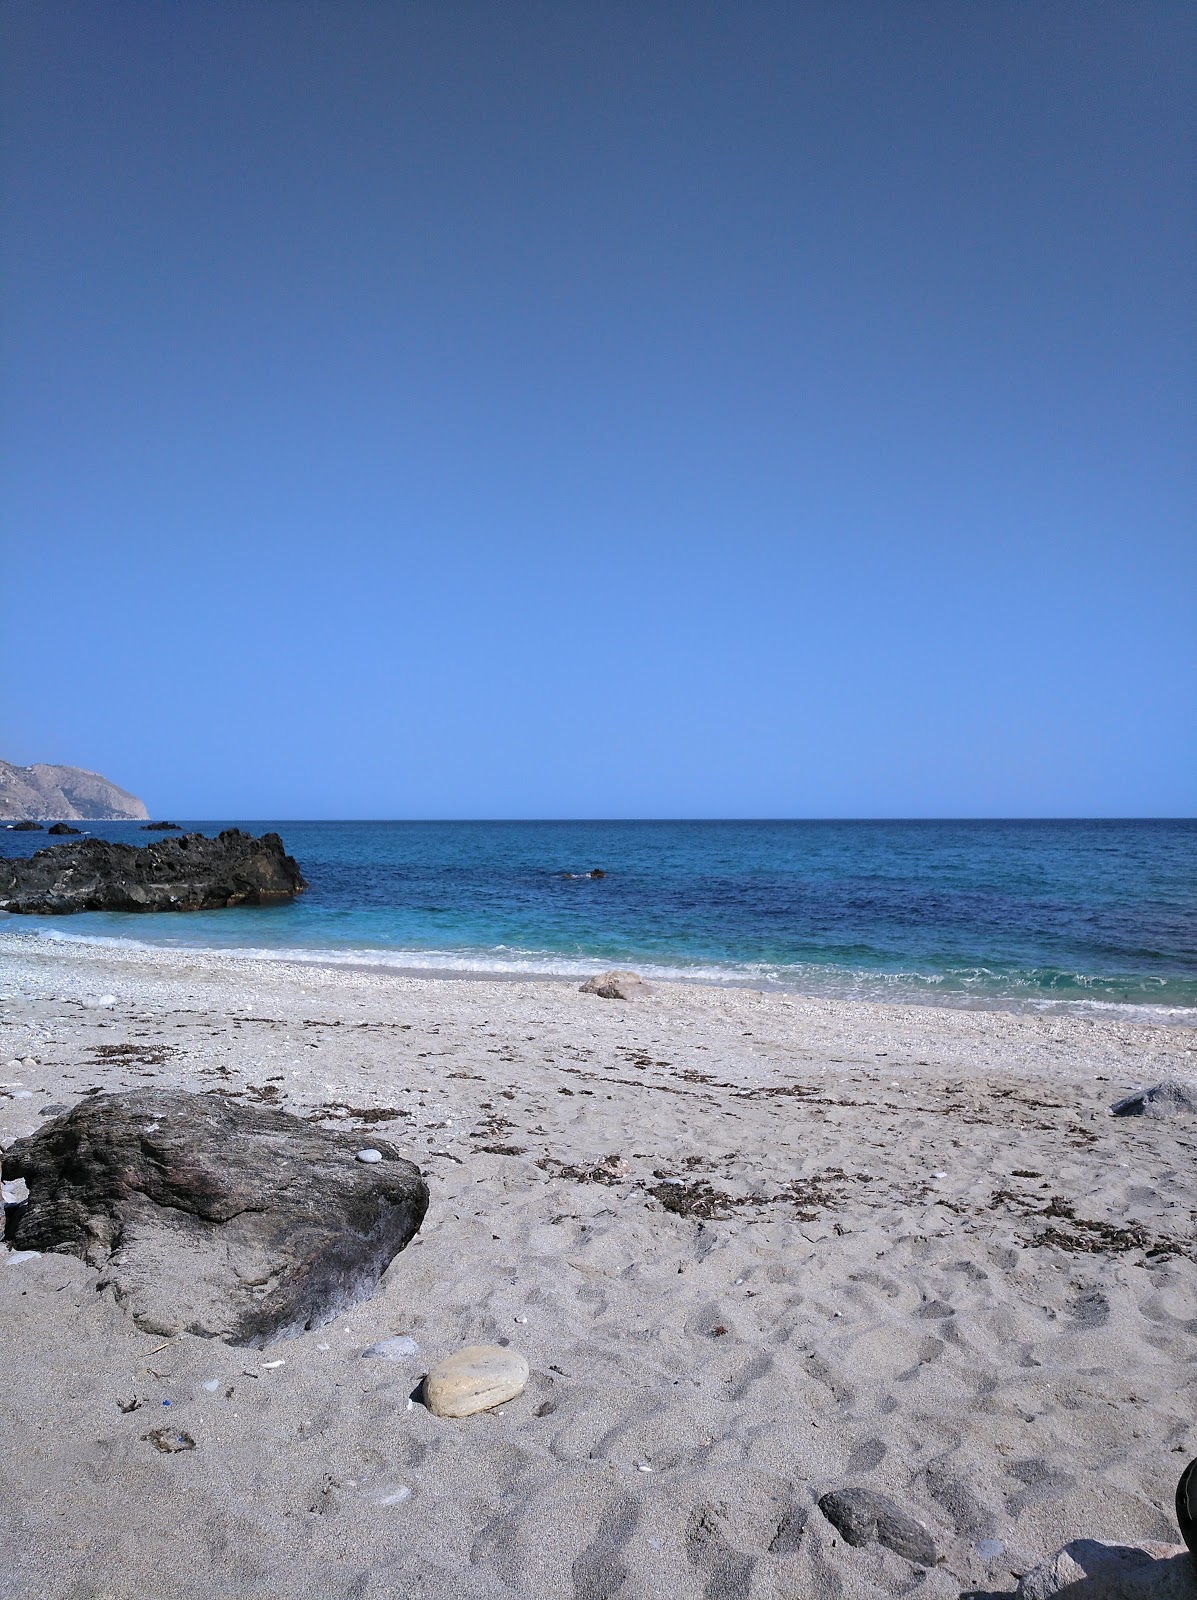 Photo of Caleta beach with turquoise pure water surface